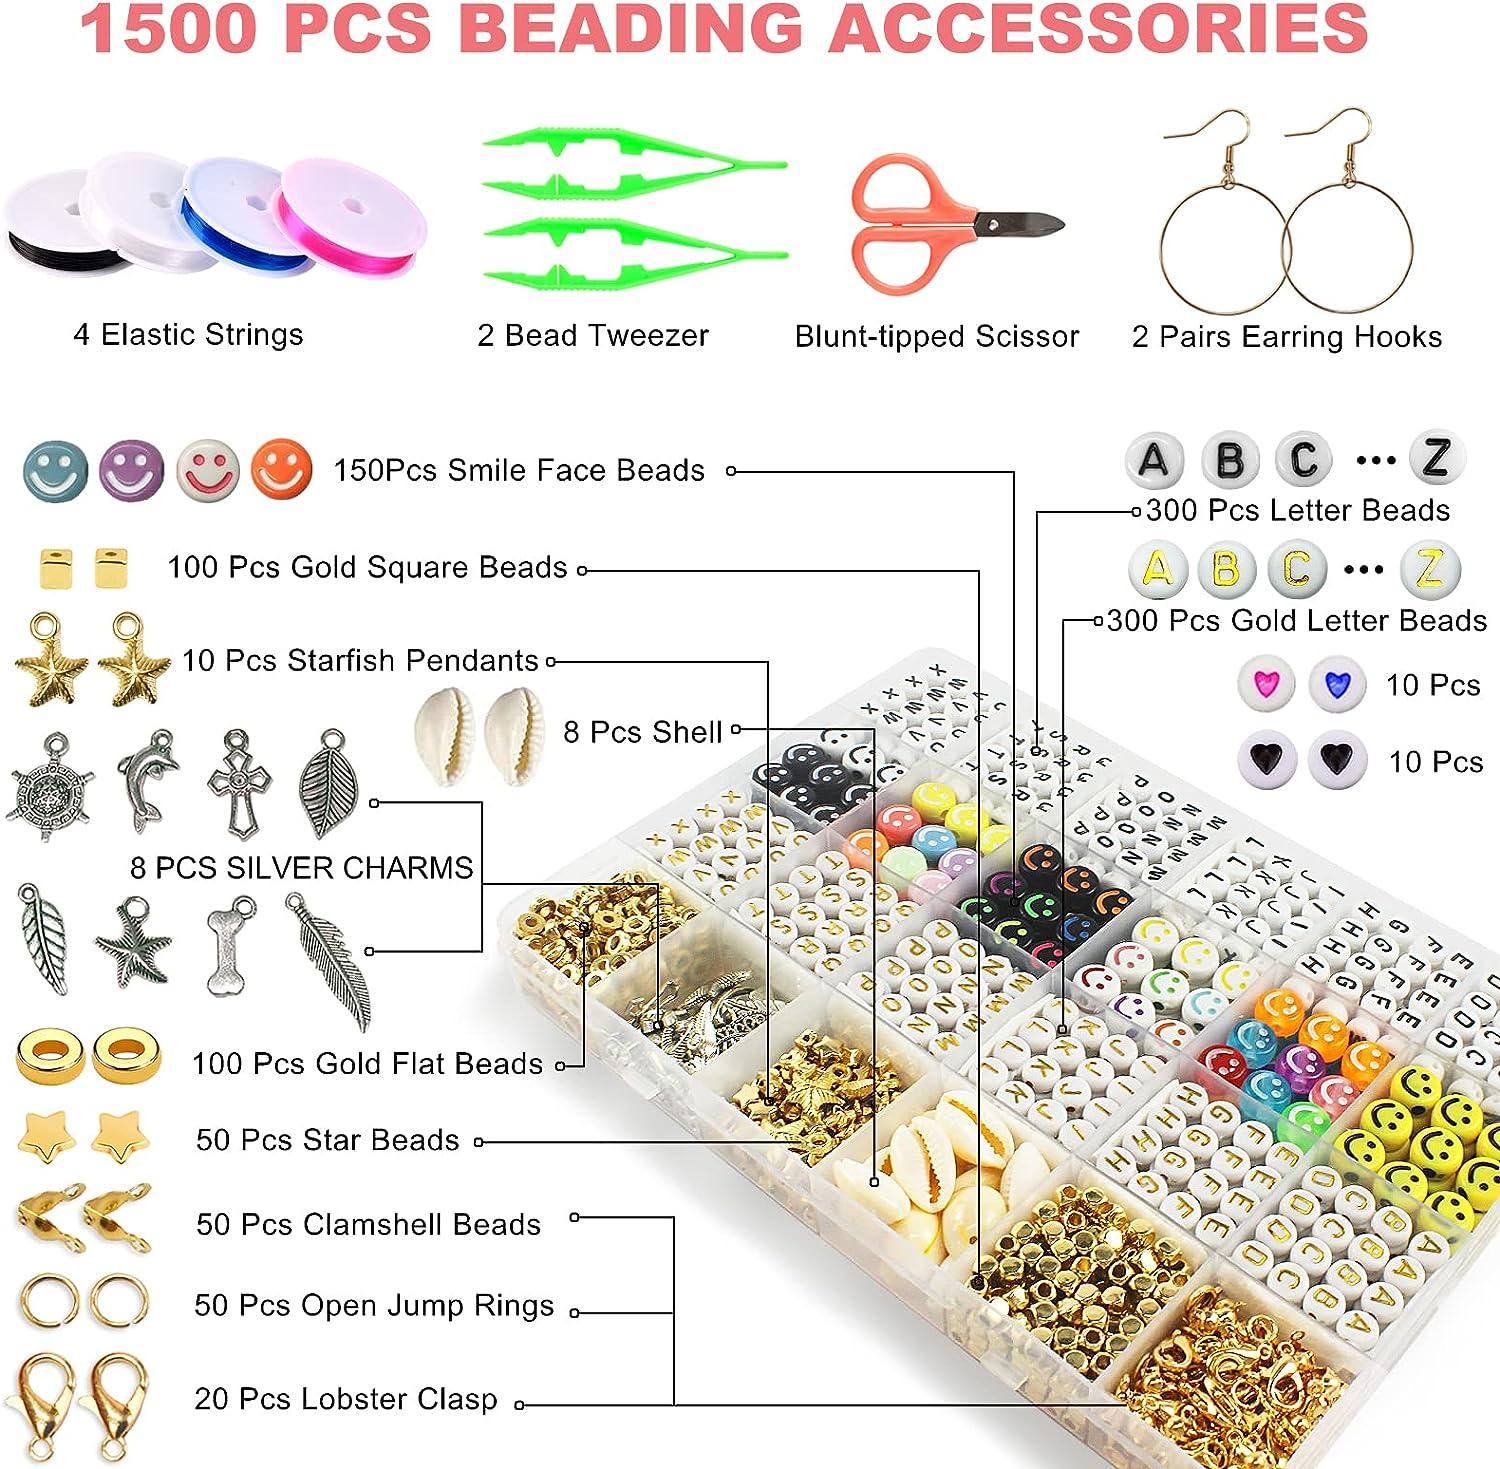  7200 Pcs Clay Beads Bracelet Making Kit, 24 Colors Flat Round  Polymer Clay Beads with Letter Beads Smiley Face Beads and Pendant Charms  for Jewelry Making, Heishi Beads for Necklace Earring